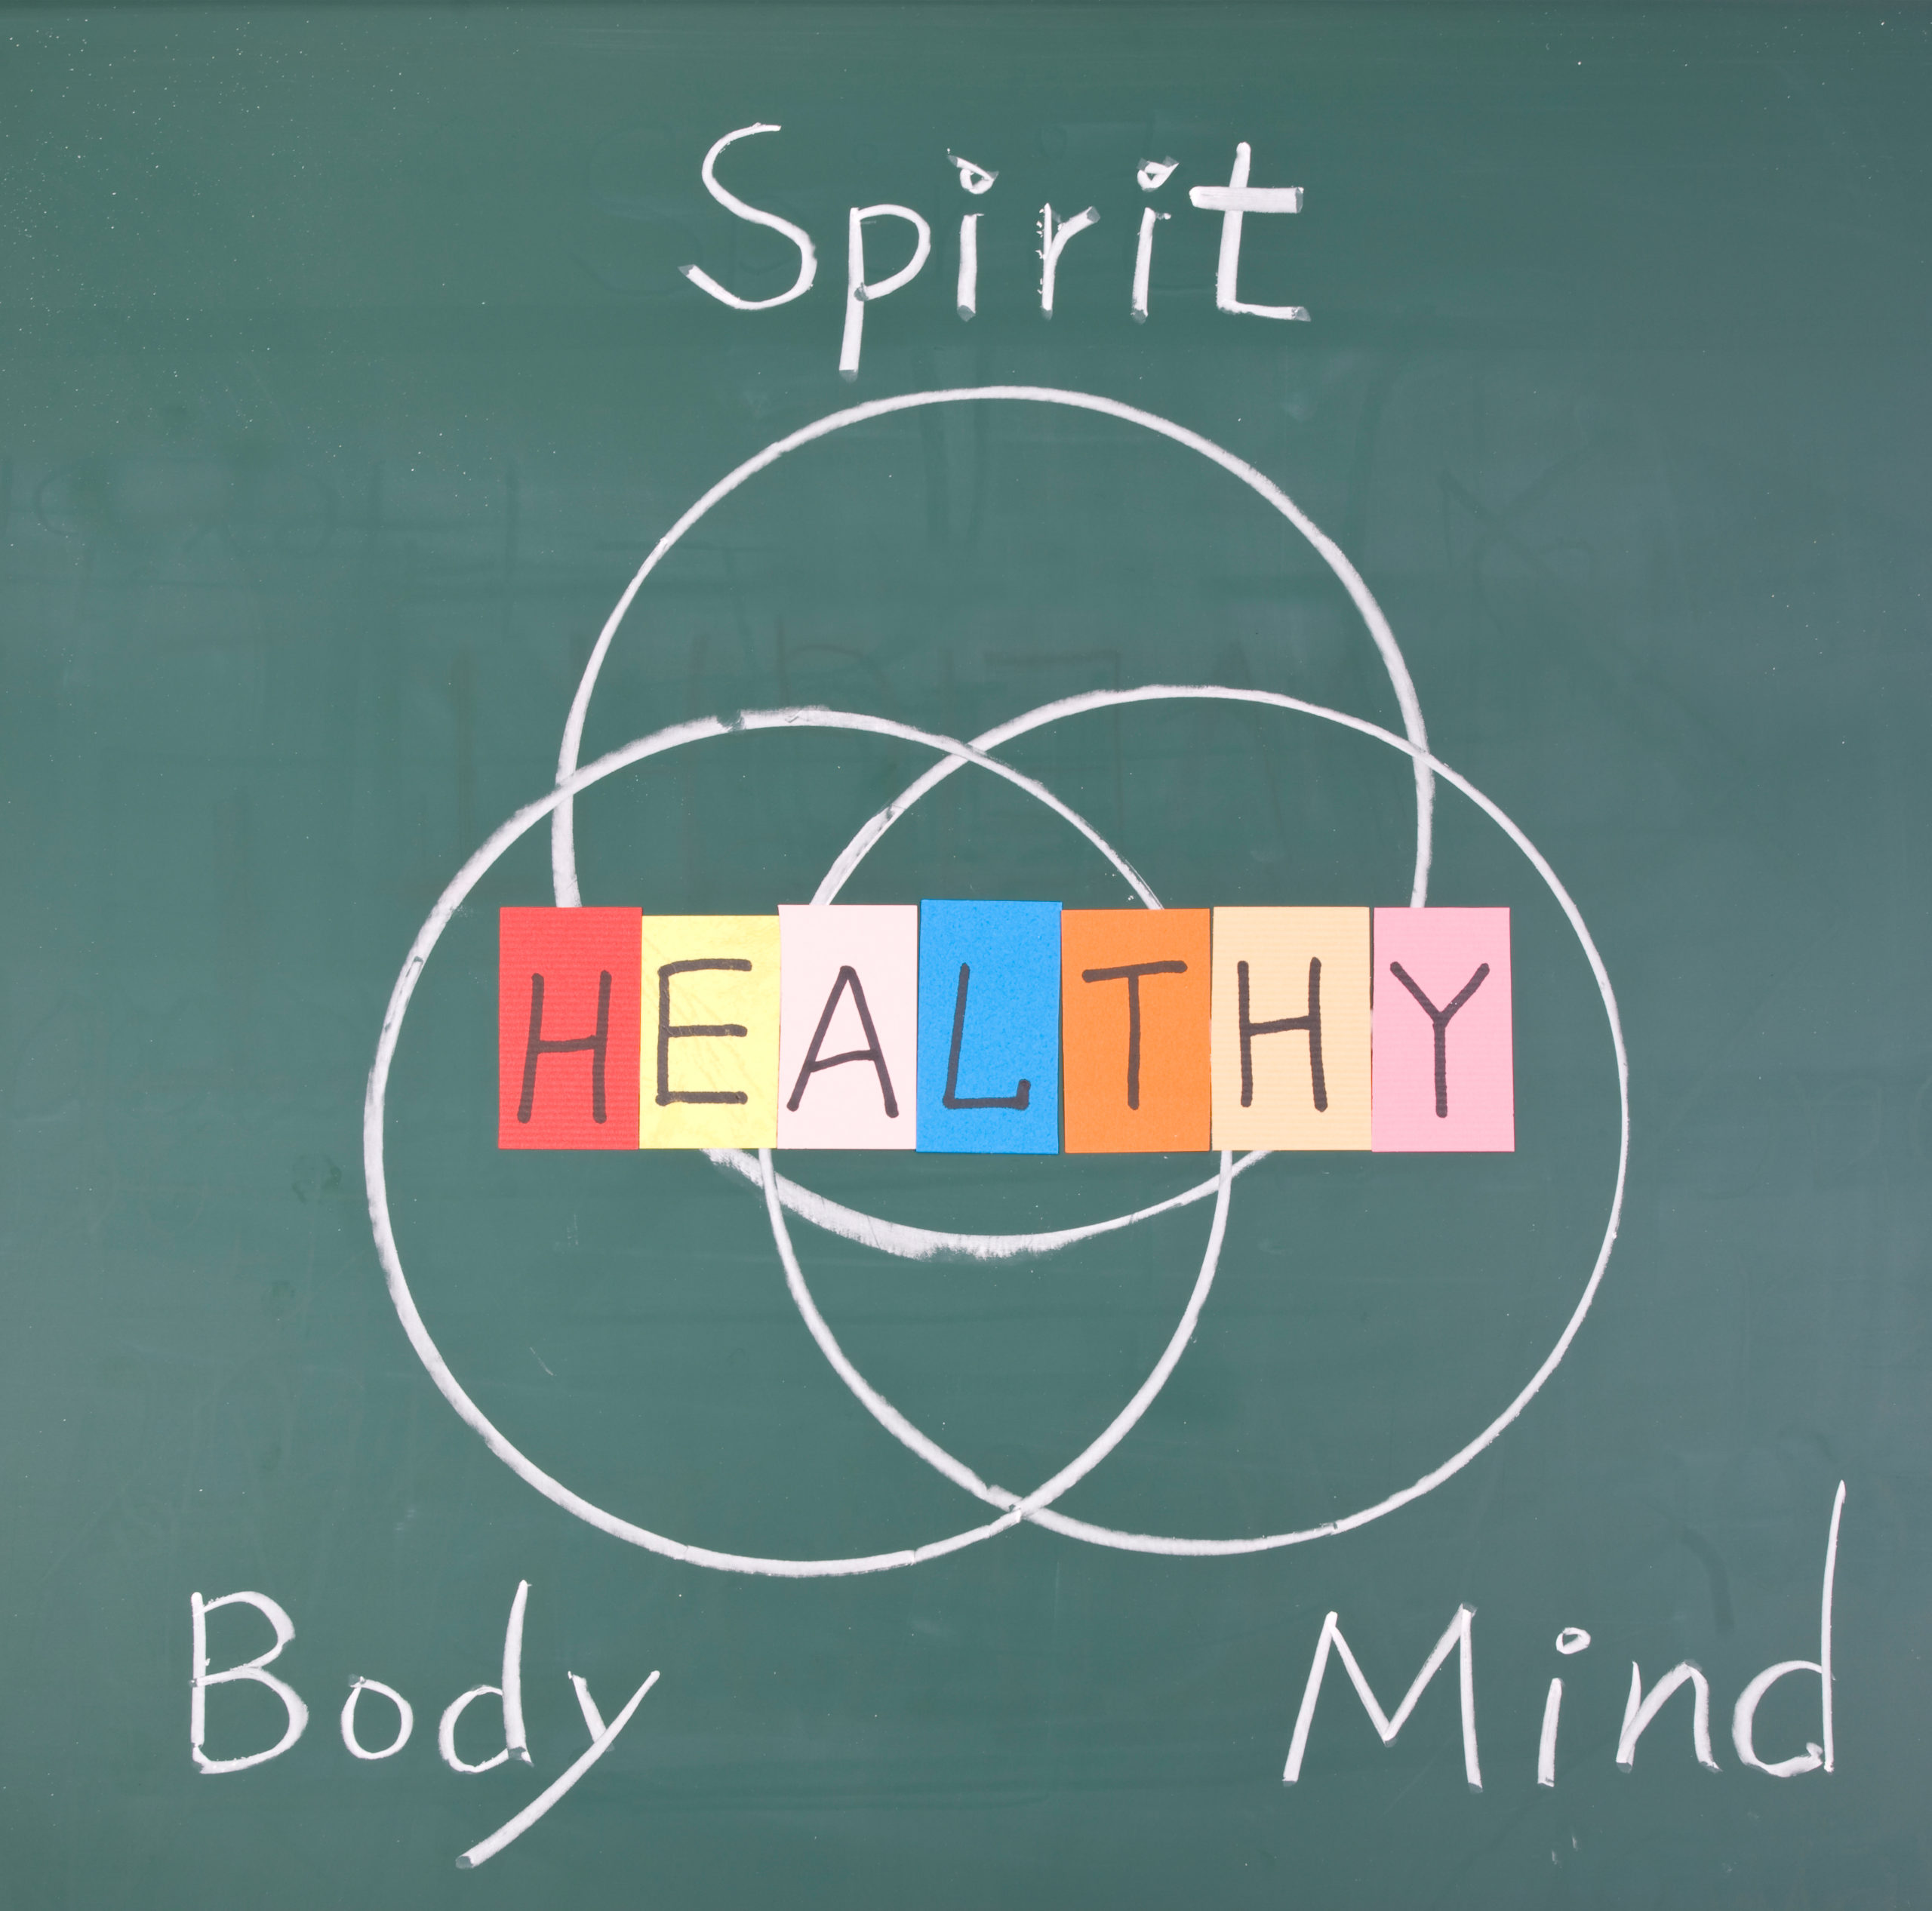 Venn diagram of spirit body and mind with health in the middle